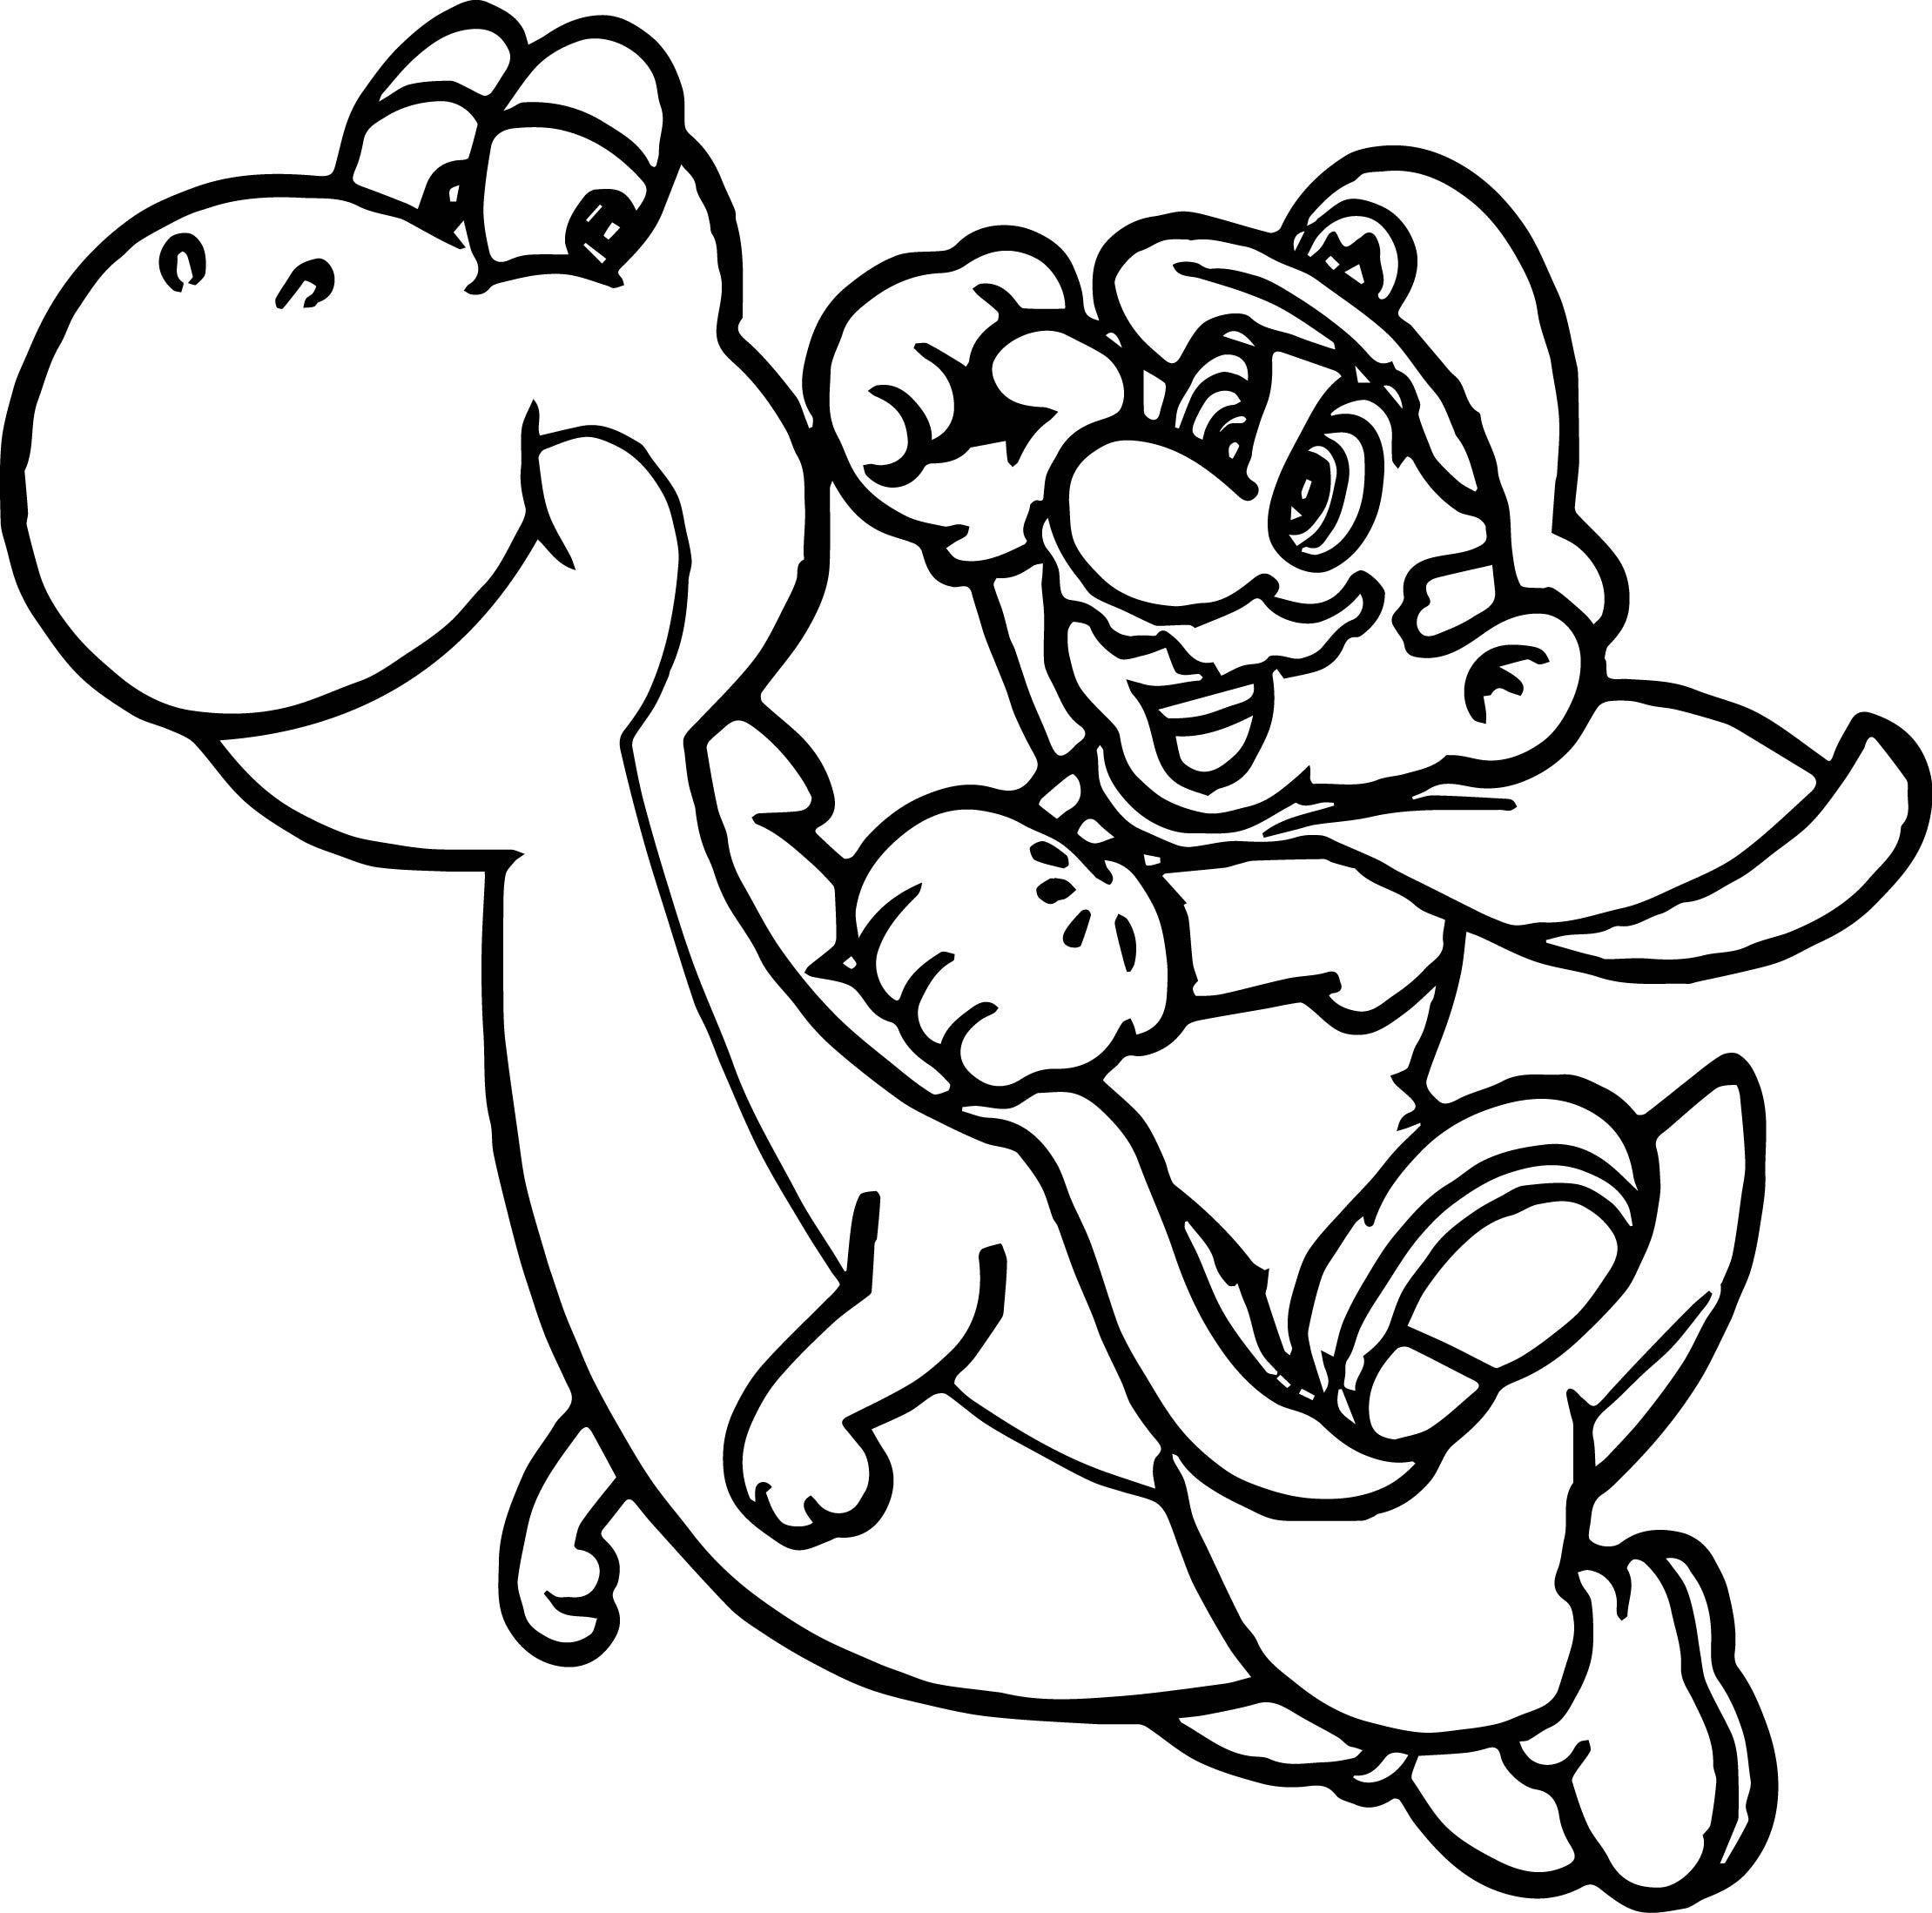 The best free Yoshi coloring page images Download from 462 free